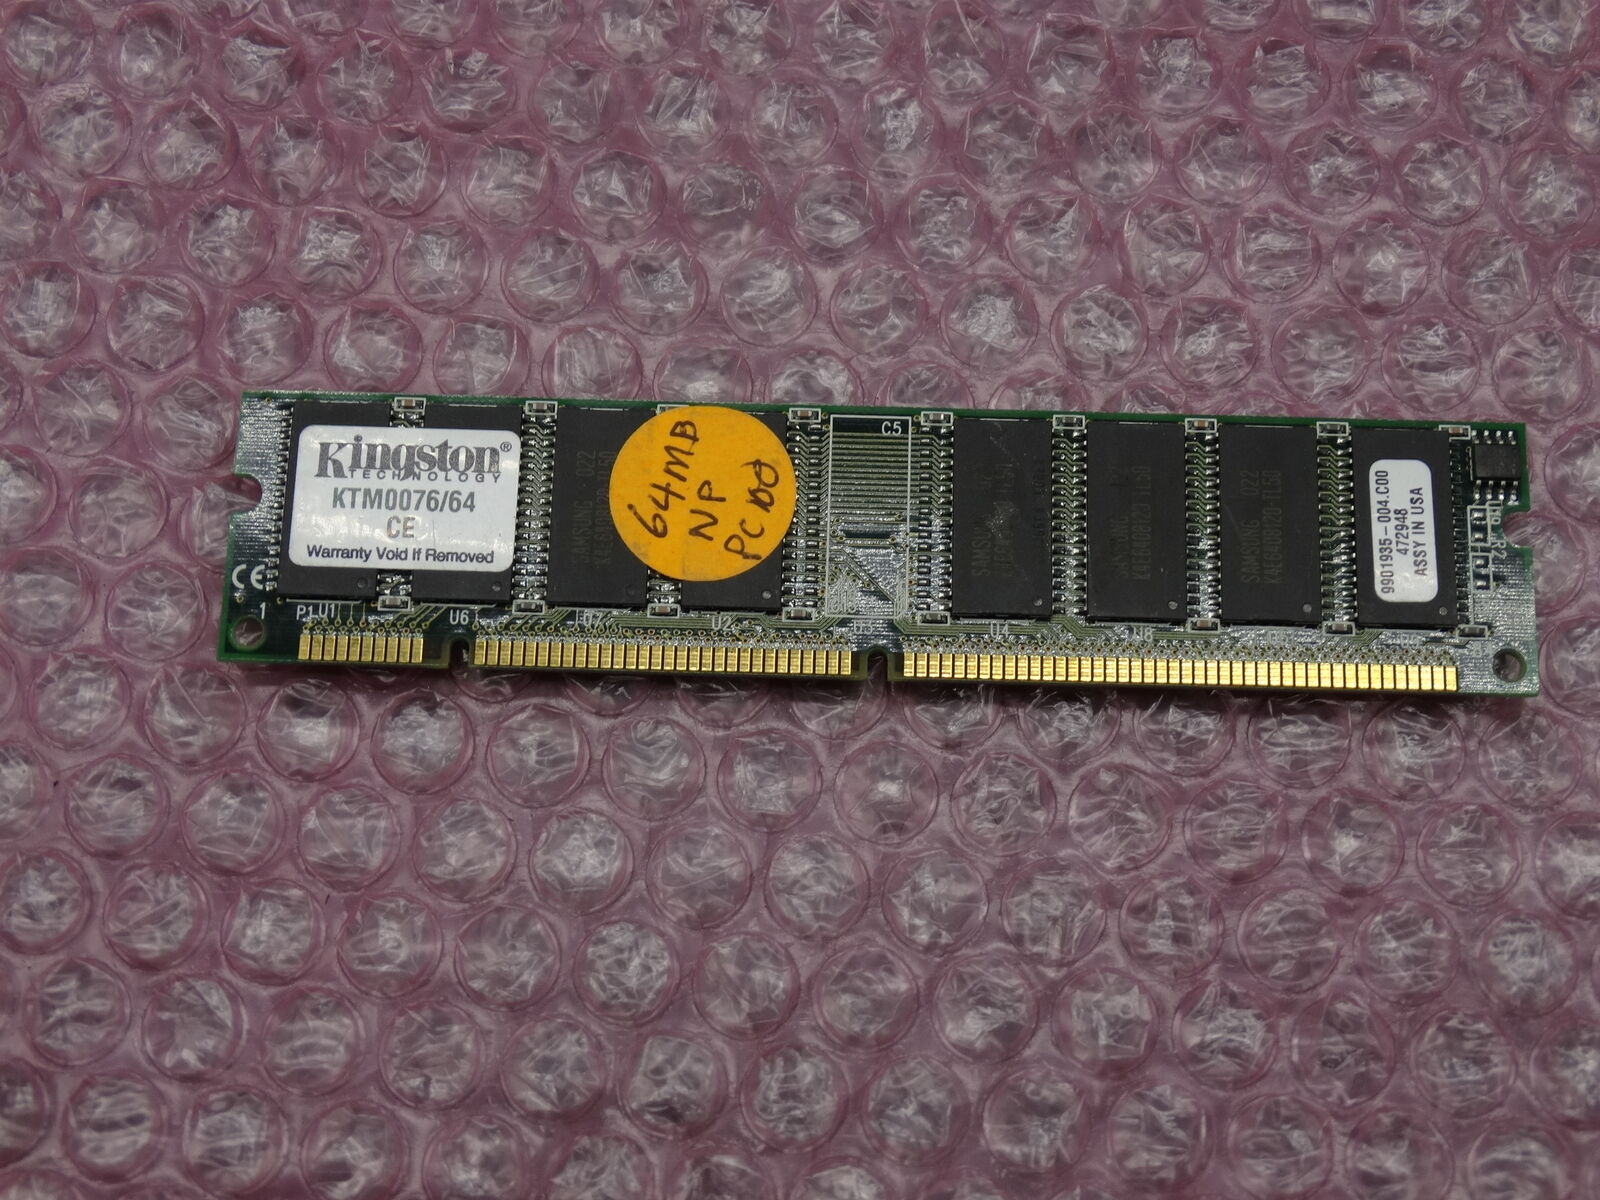 Kingston 64MB Memory KTM0076/64 CE Mainframe Collection